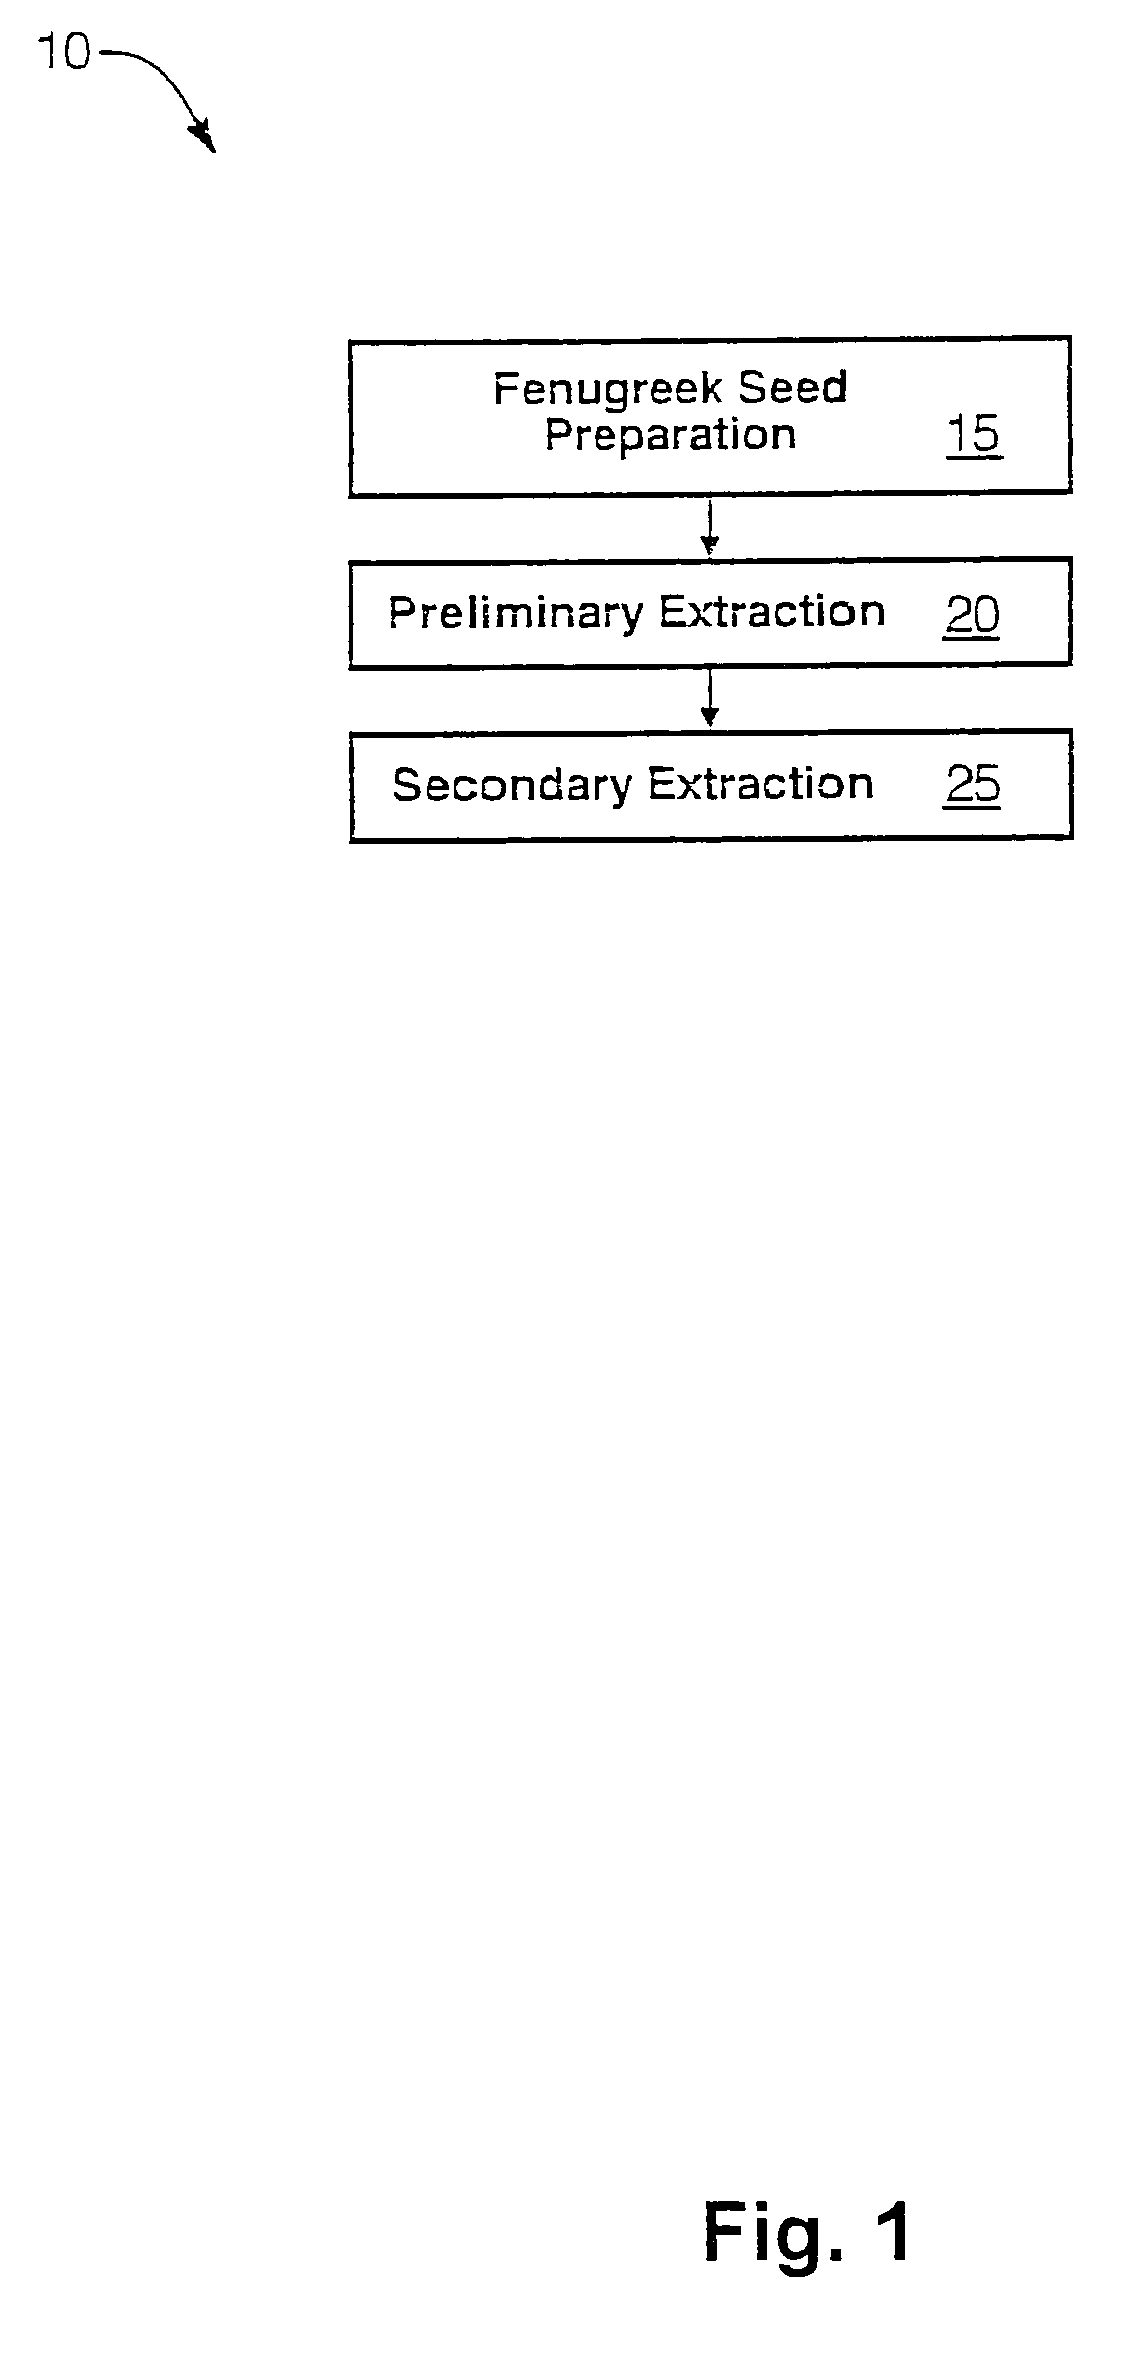 Methods for deriving, isolating, and/or extracting amino acid compositions from Fenugreek seed